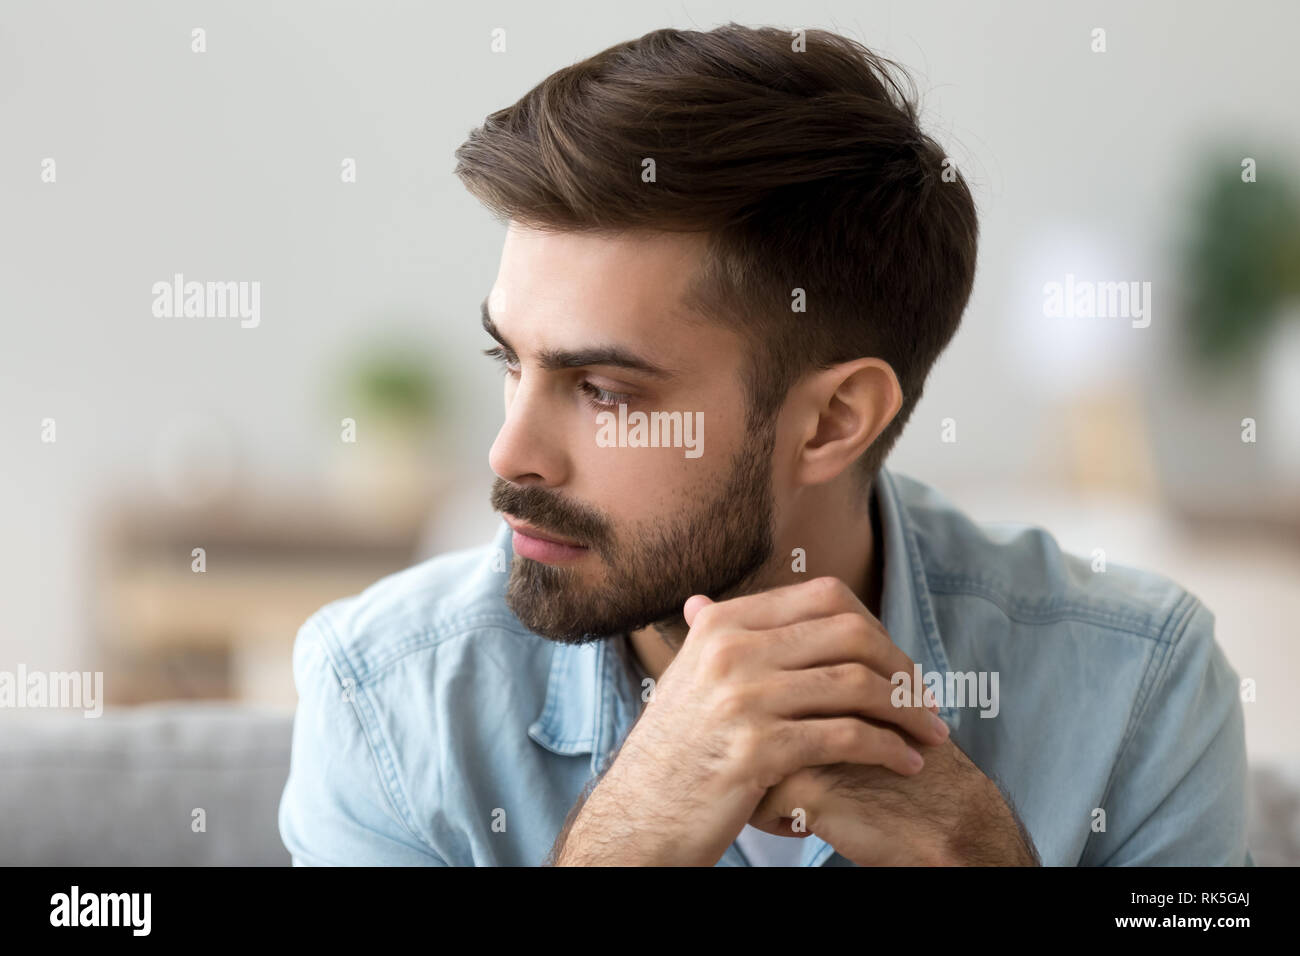 Thoughtful concerned man thinking about problem solution lost in thoughts Stock Photo